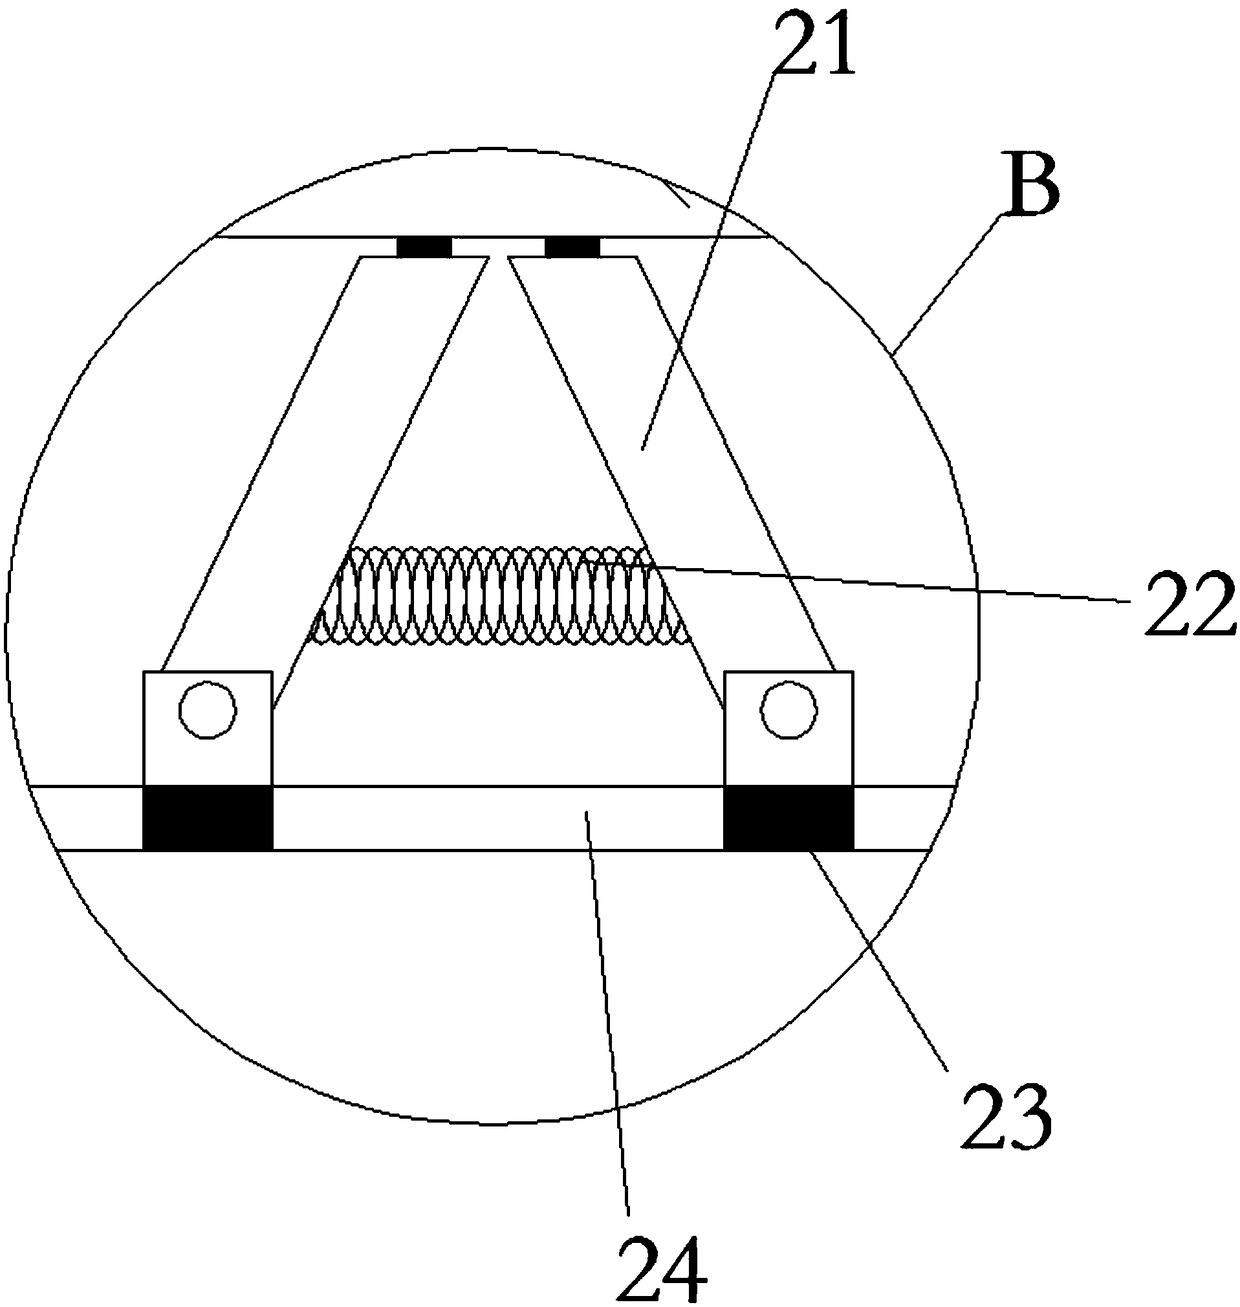 Indoor layered positioning device based on composite positioning technology